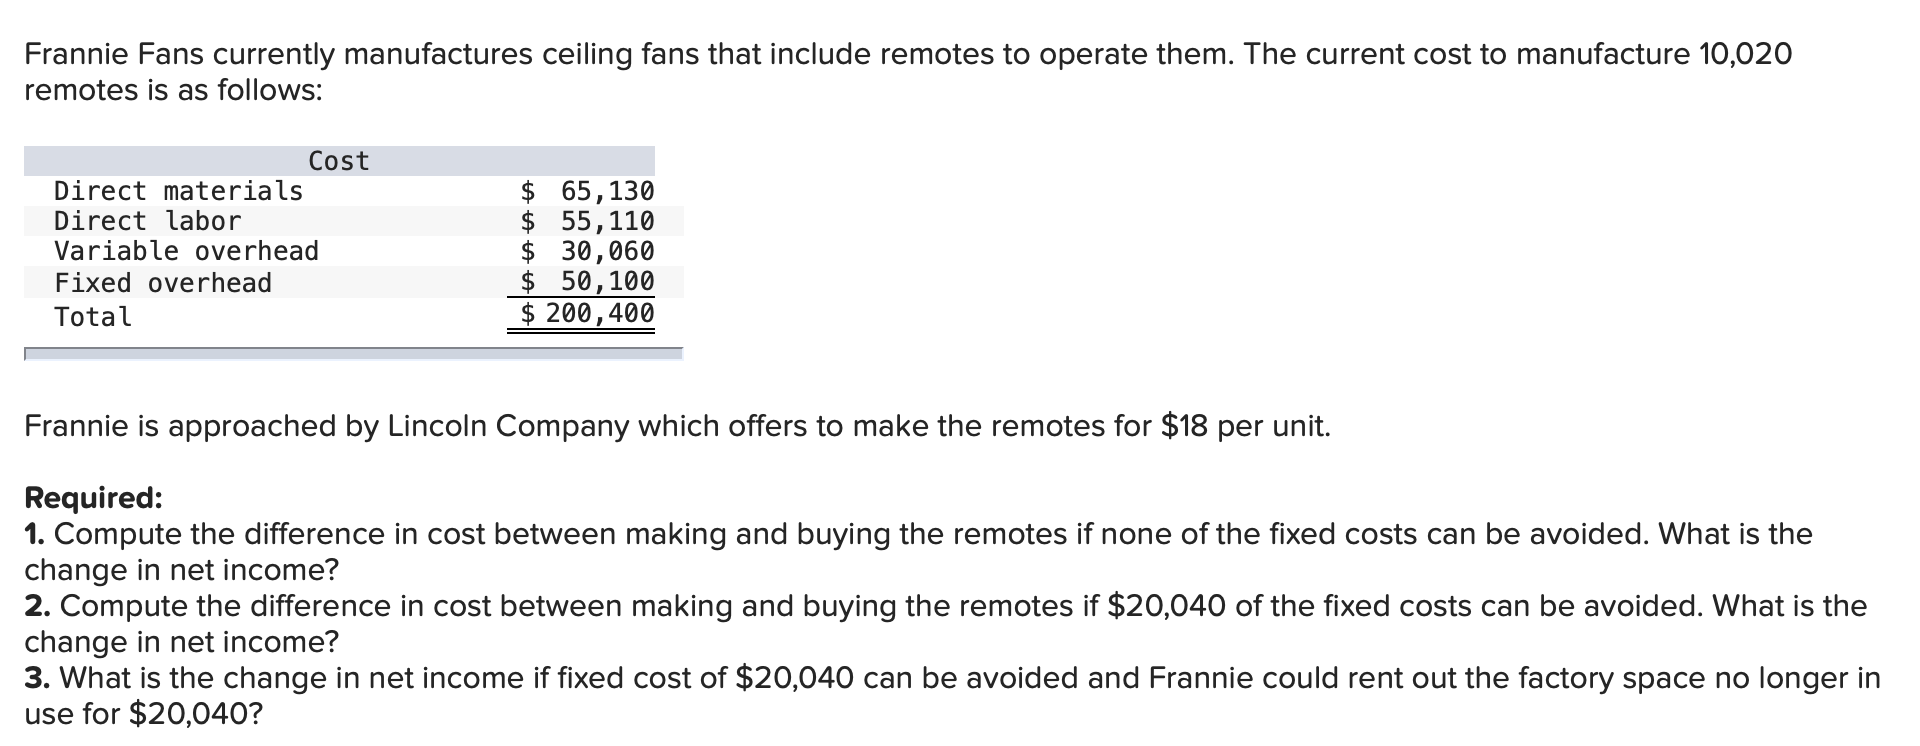 Frannie Fans currently manufactures ceiling fans that include remotes to operate them. The current cost to manufacture 10,020
remotes is as follows:
Cost
Direct materials
Direct labor
Variable overhead
$ 65,130
$ 55,110
$30,060
$50,100
$ 200,400
Fixed overhead
Total
Frannie is approached by Lincoln Company which offers to make the remotes for $18 per unit.
Required:
1. Compute the difference in cost between making and buying the remotes if none of the fixed costs can be avoided. What is the
change in net income?
2. Compute the difference in cost between making and buying the remotes if $20,040 of the fixed costs can be avoided. What is the
change in net income?
3. What is the change in net income if fixed cost of $20,040 can be avoided and Frannie could rent out the factory space no longer in
use for $20,040?
